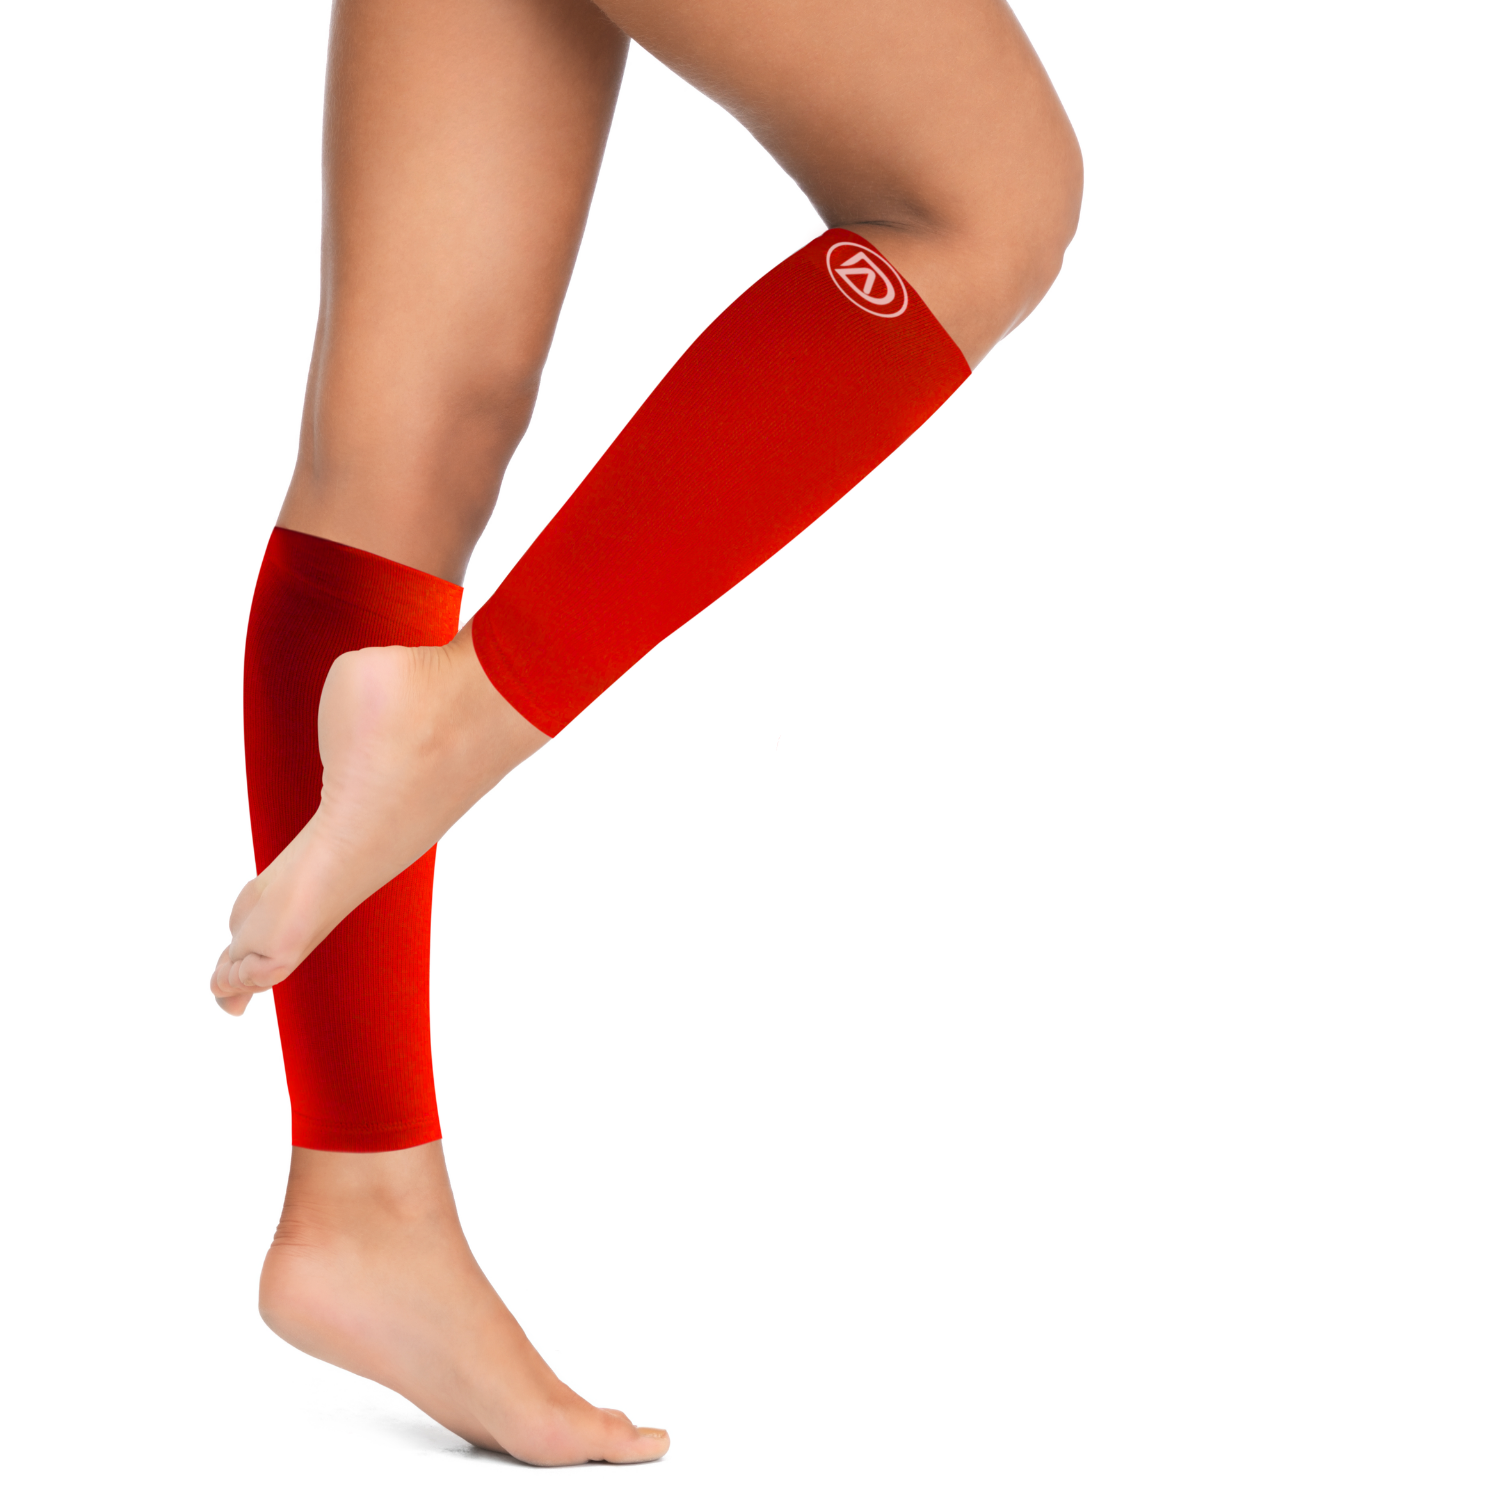  Plus Size Compression Sleeves for Calves Women Wide Calf  Compression Legs Sleeves Men 6XL, Relieve Varicose Veins, Edema, Swelling,  Soreness, Shin splints, for Work, Travel, Sports and Daily Wear : Health